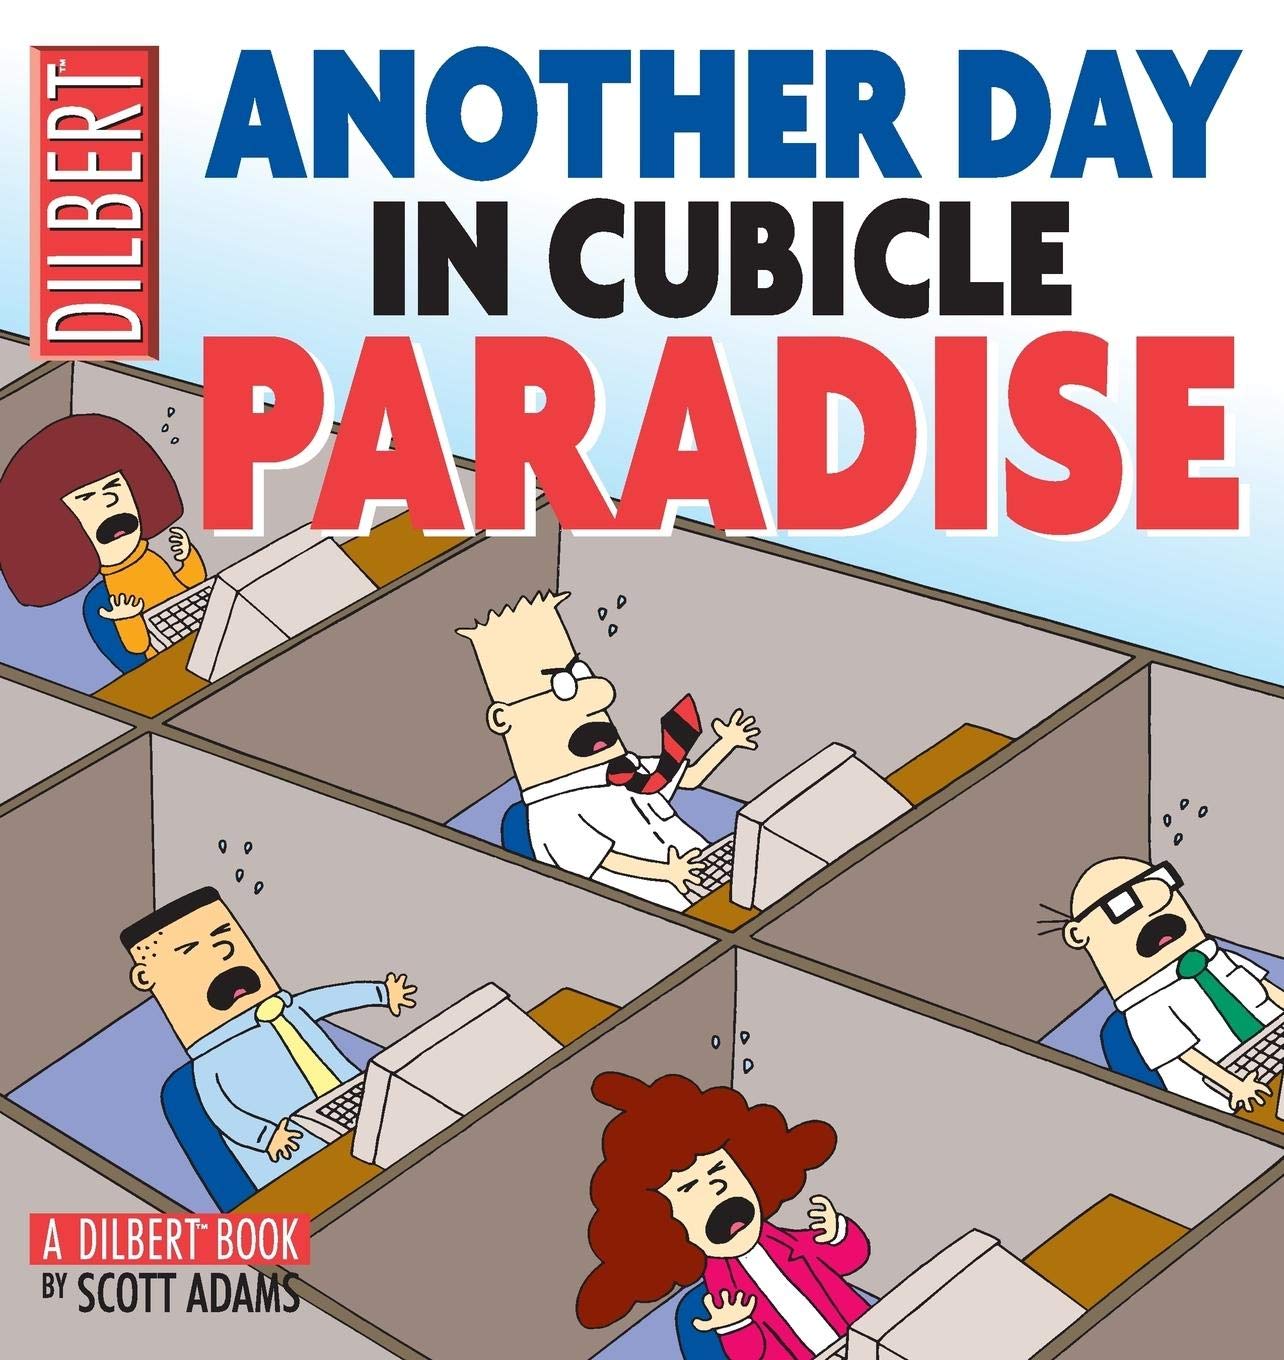 Another Day In Cubicle Paradise: A Dilbert Book (Volume 19)